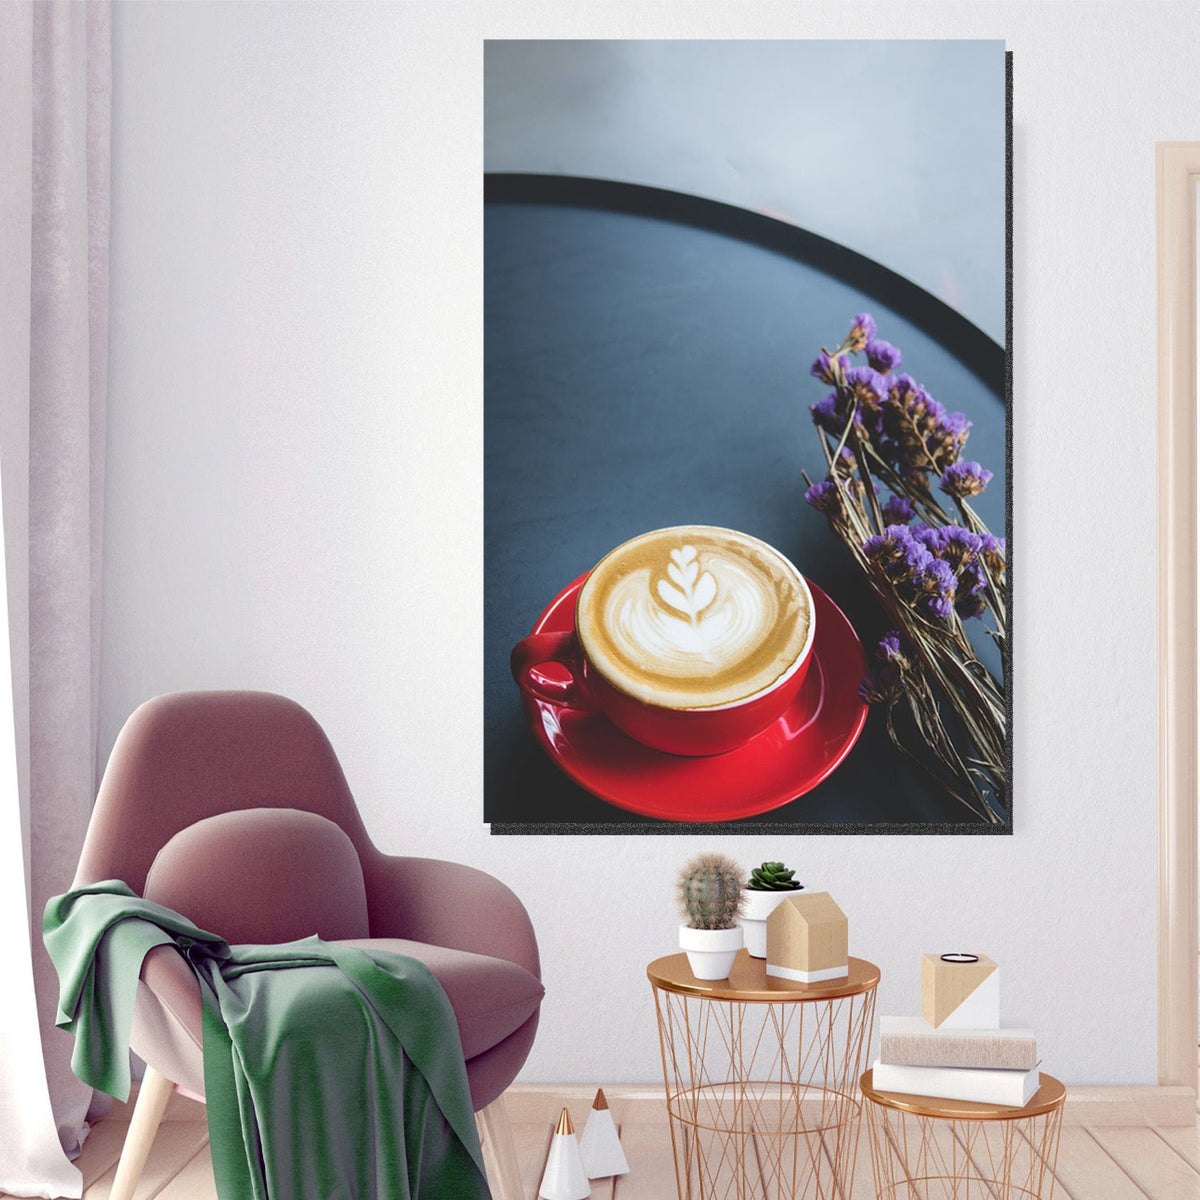 https://cdn.shopify.com/s/files/1/0387/9986/8044/products/CoffeeinaRedCupCanvasArtprintStretched-4.jpg